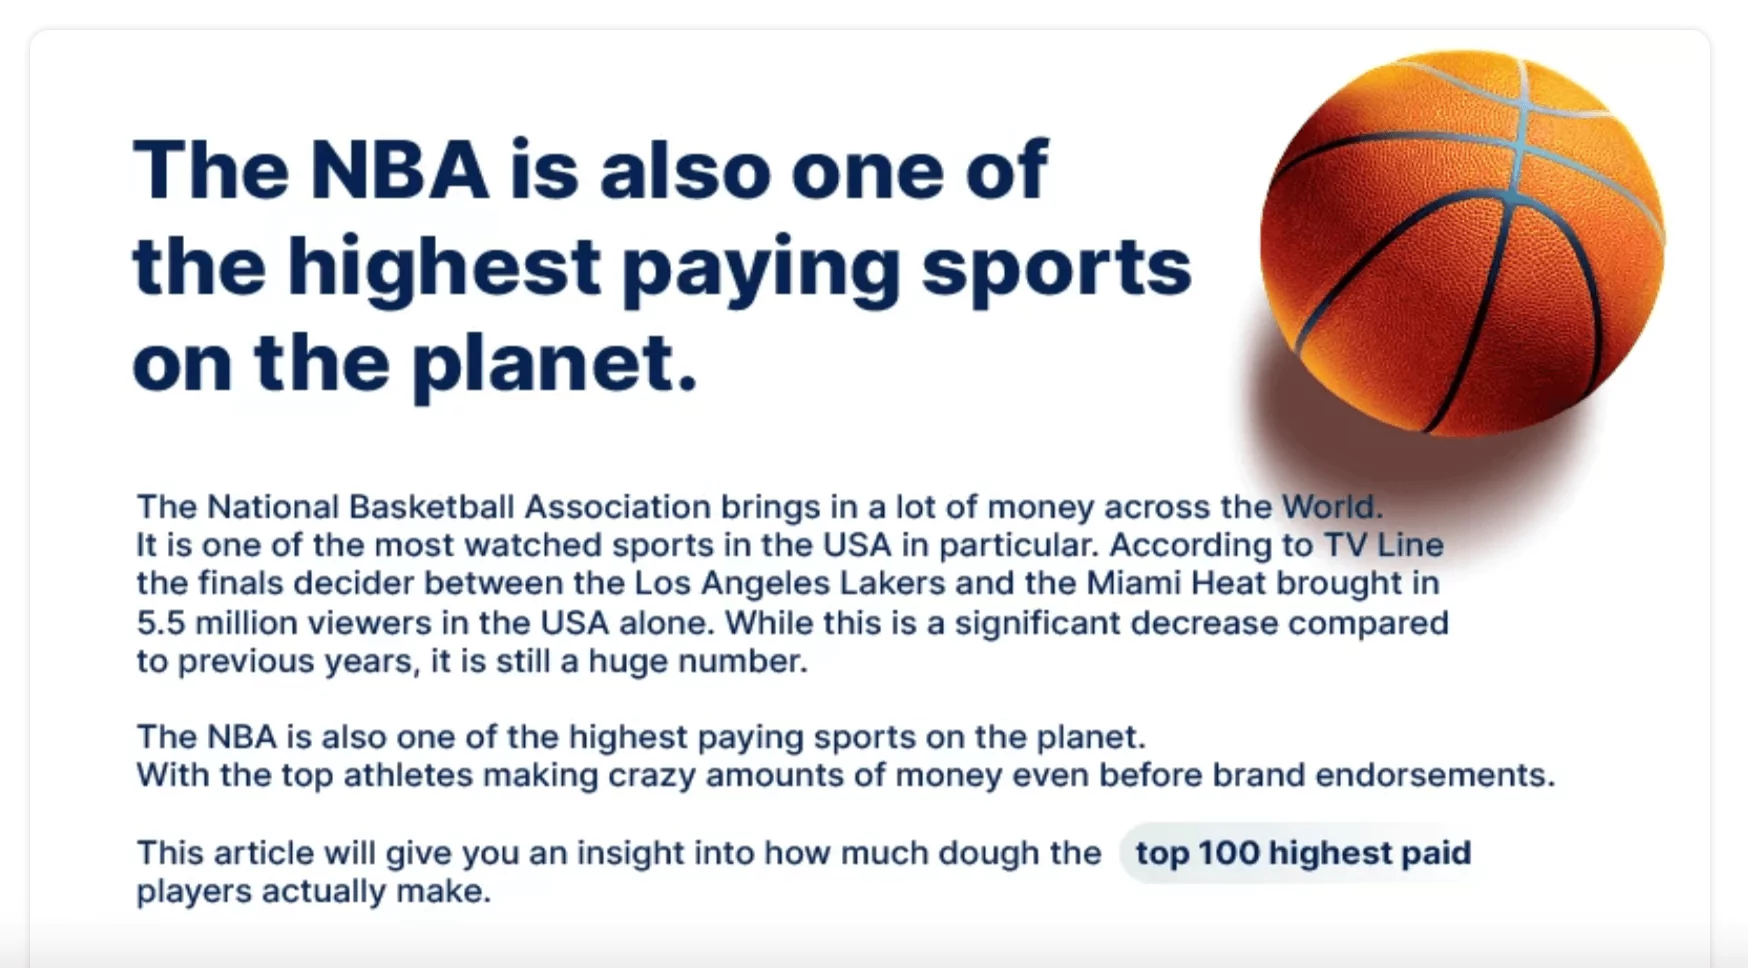 HowToBet.com - Highest Paid Athletes In The NBA: Top 100